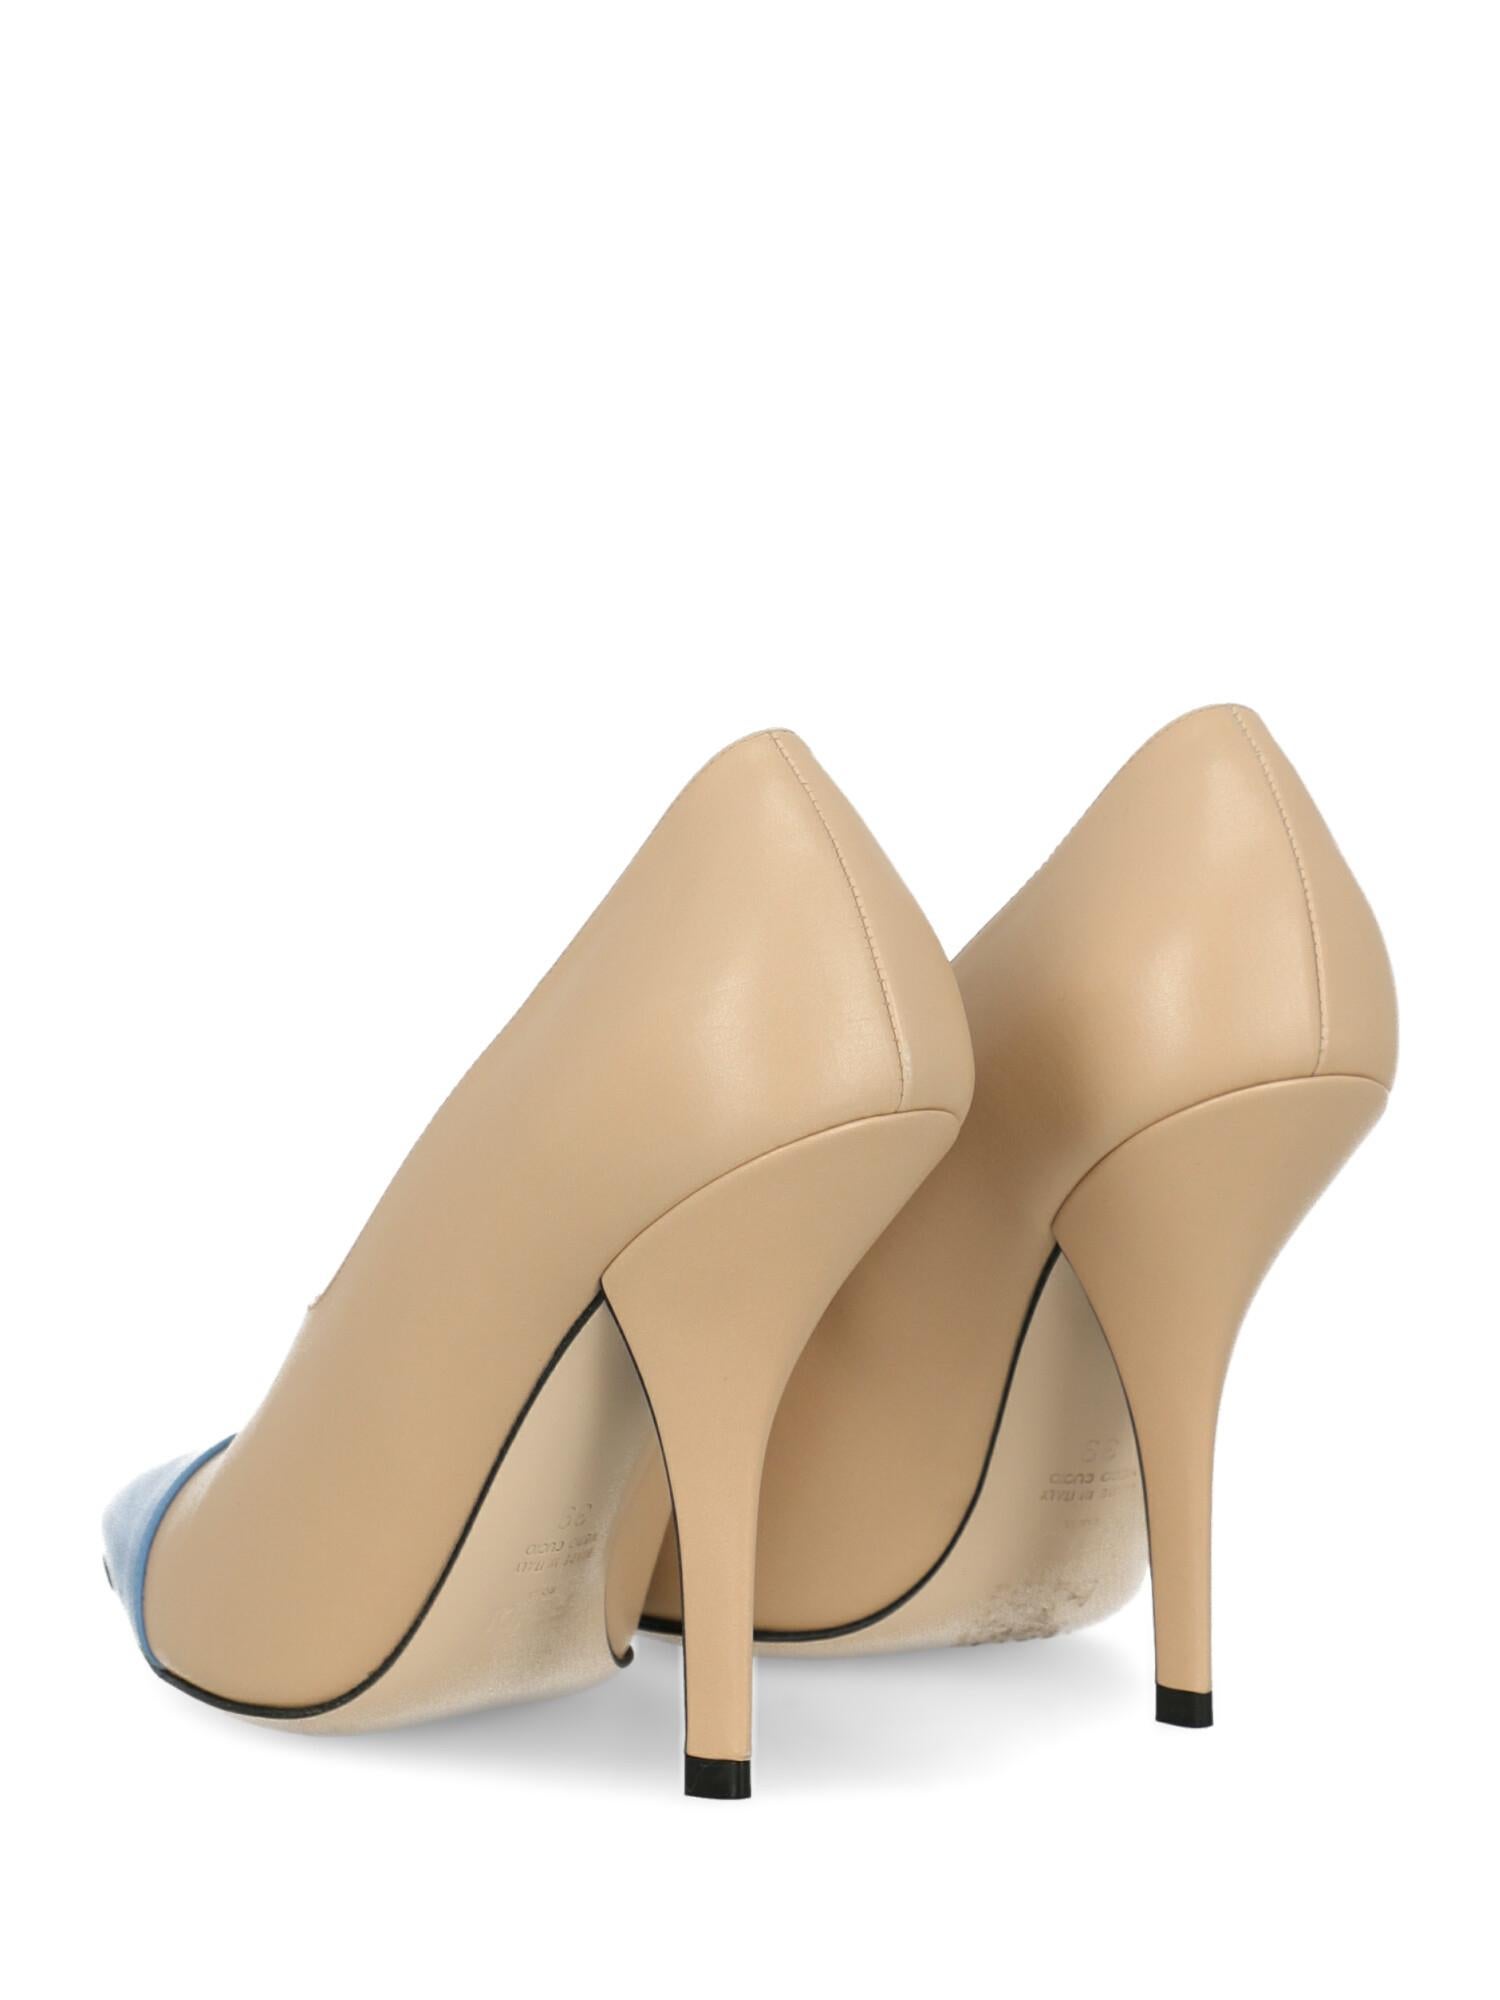 beige leather pumps